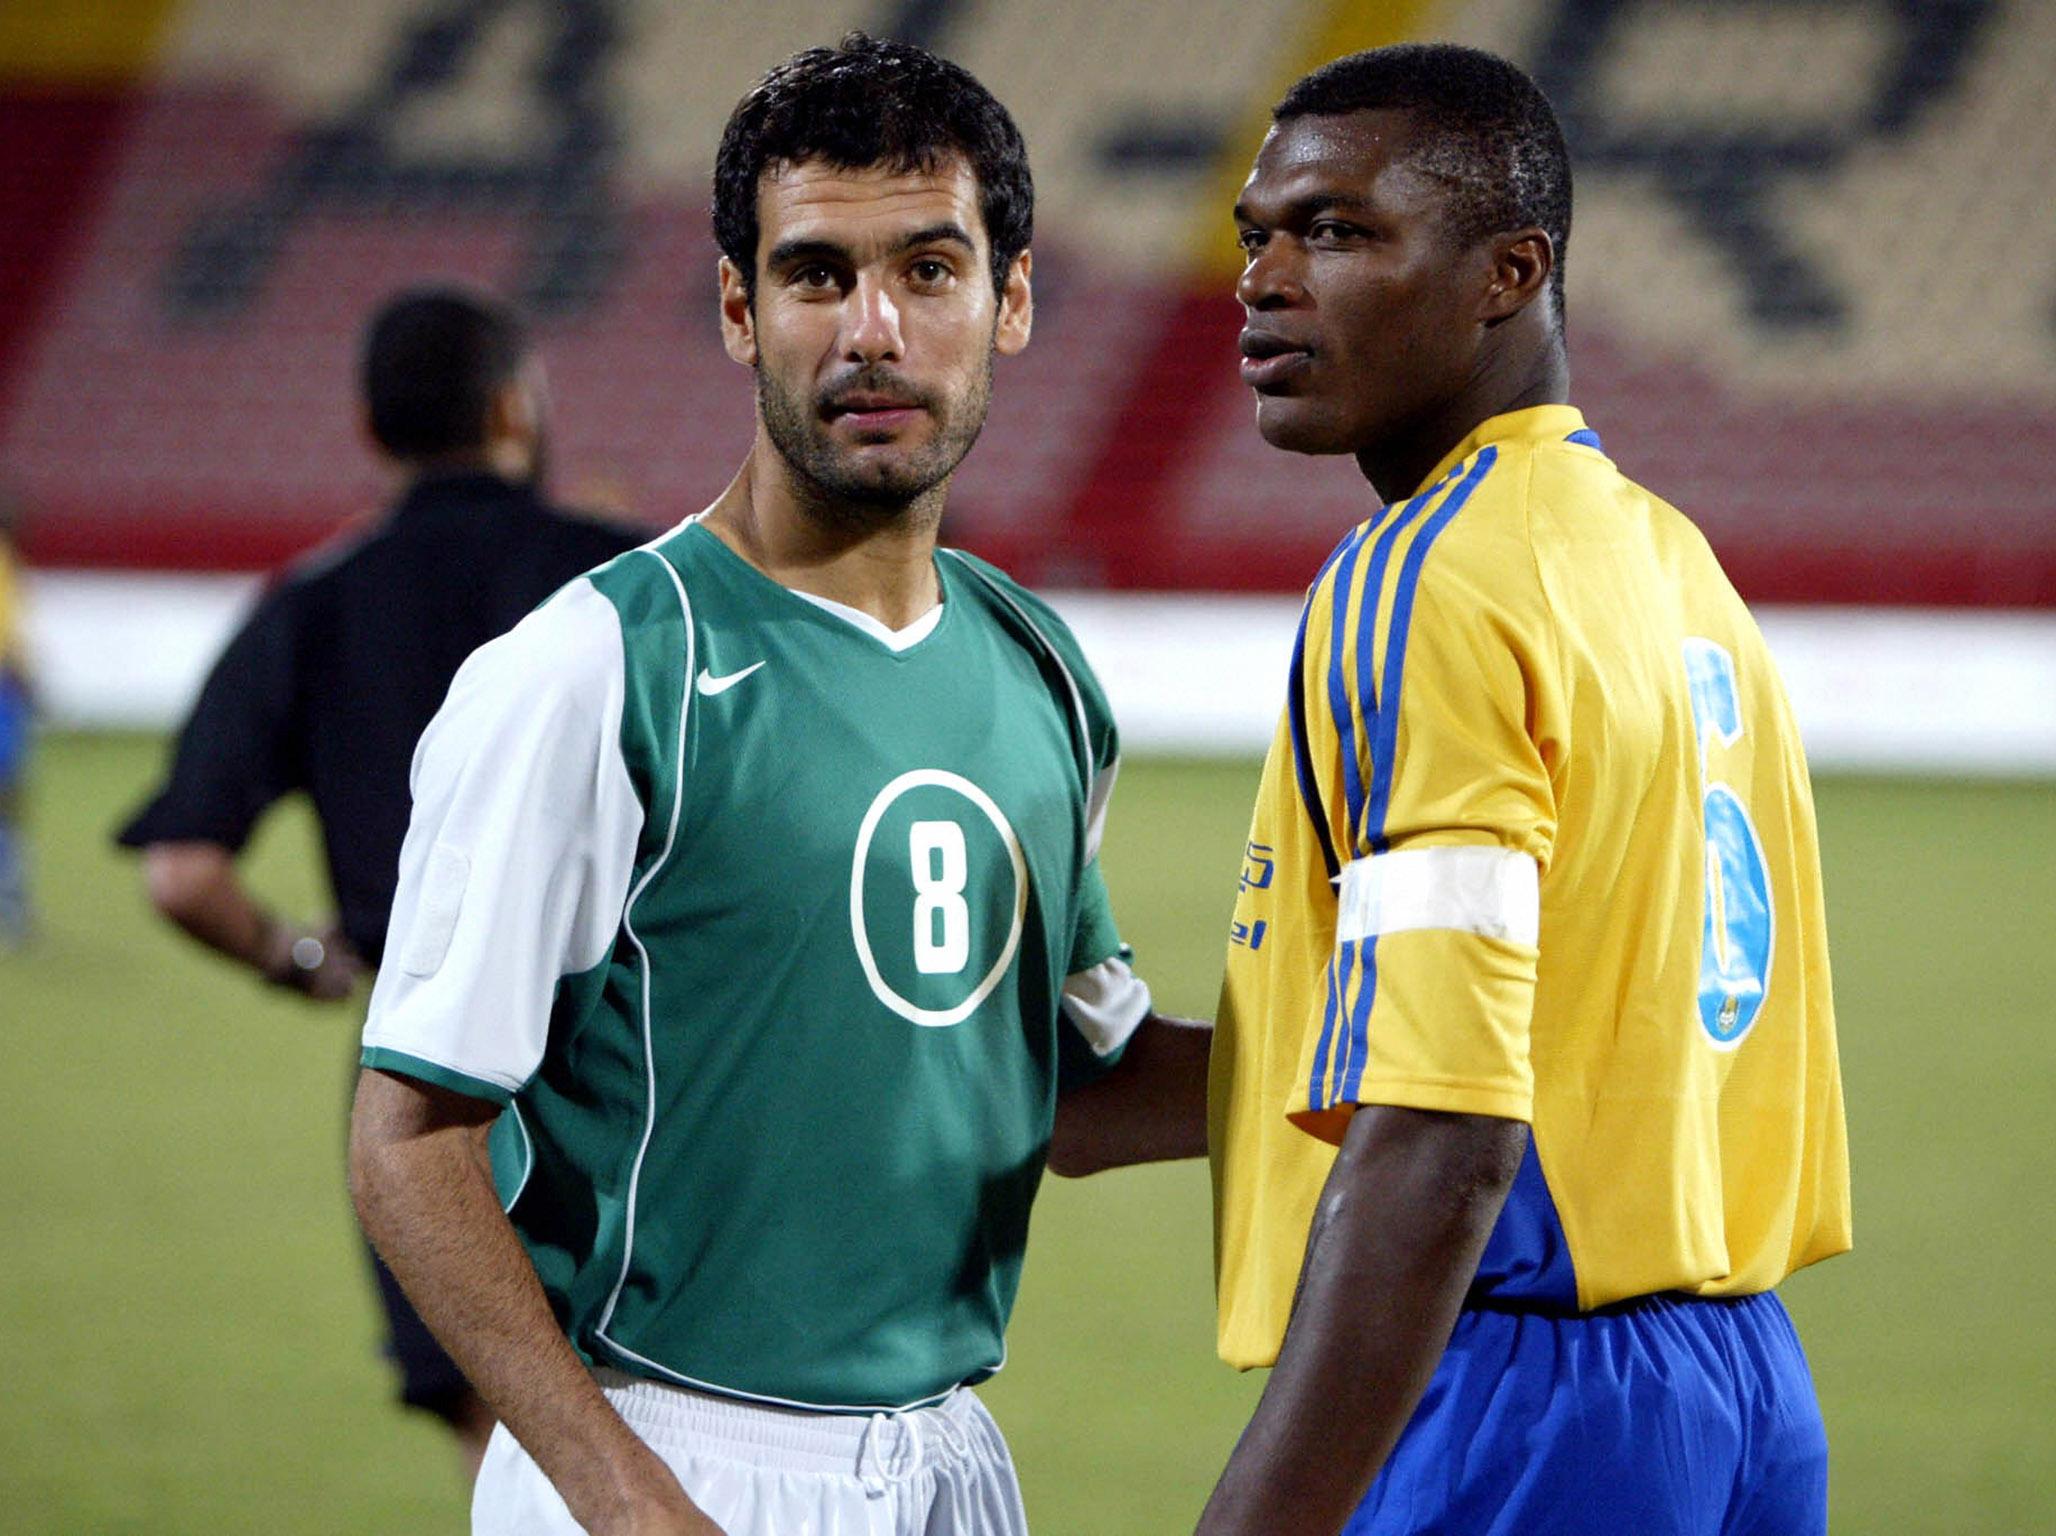 Wigan tried to sign Pep Guardiola after he played for Al-Ahli, pictured